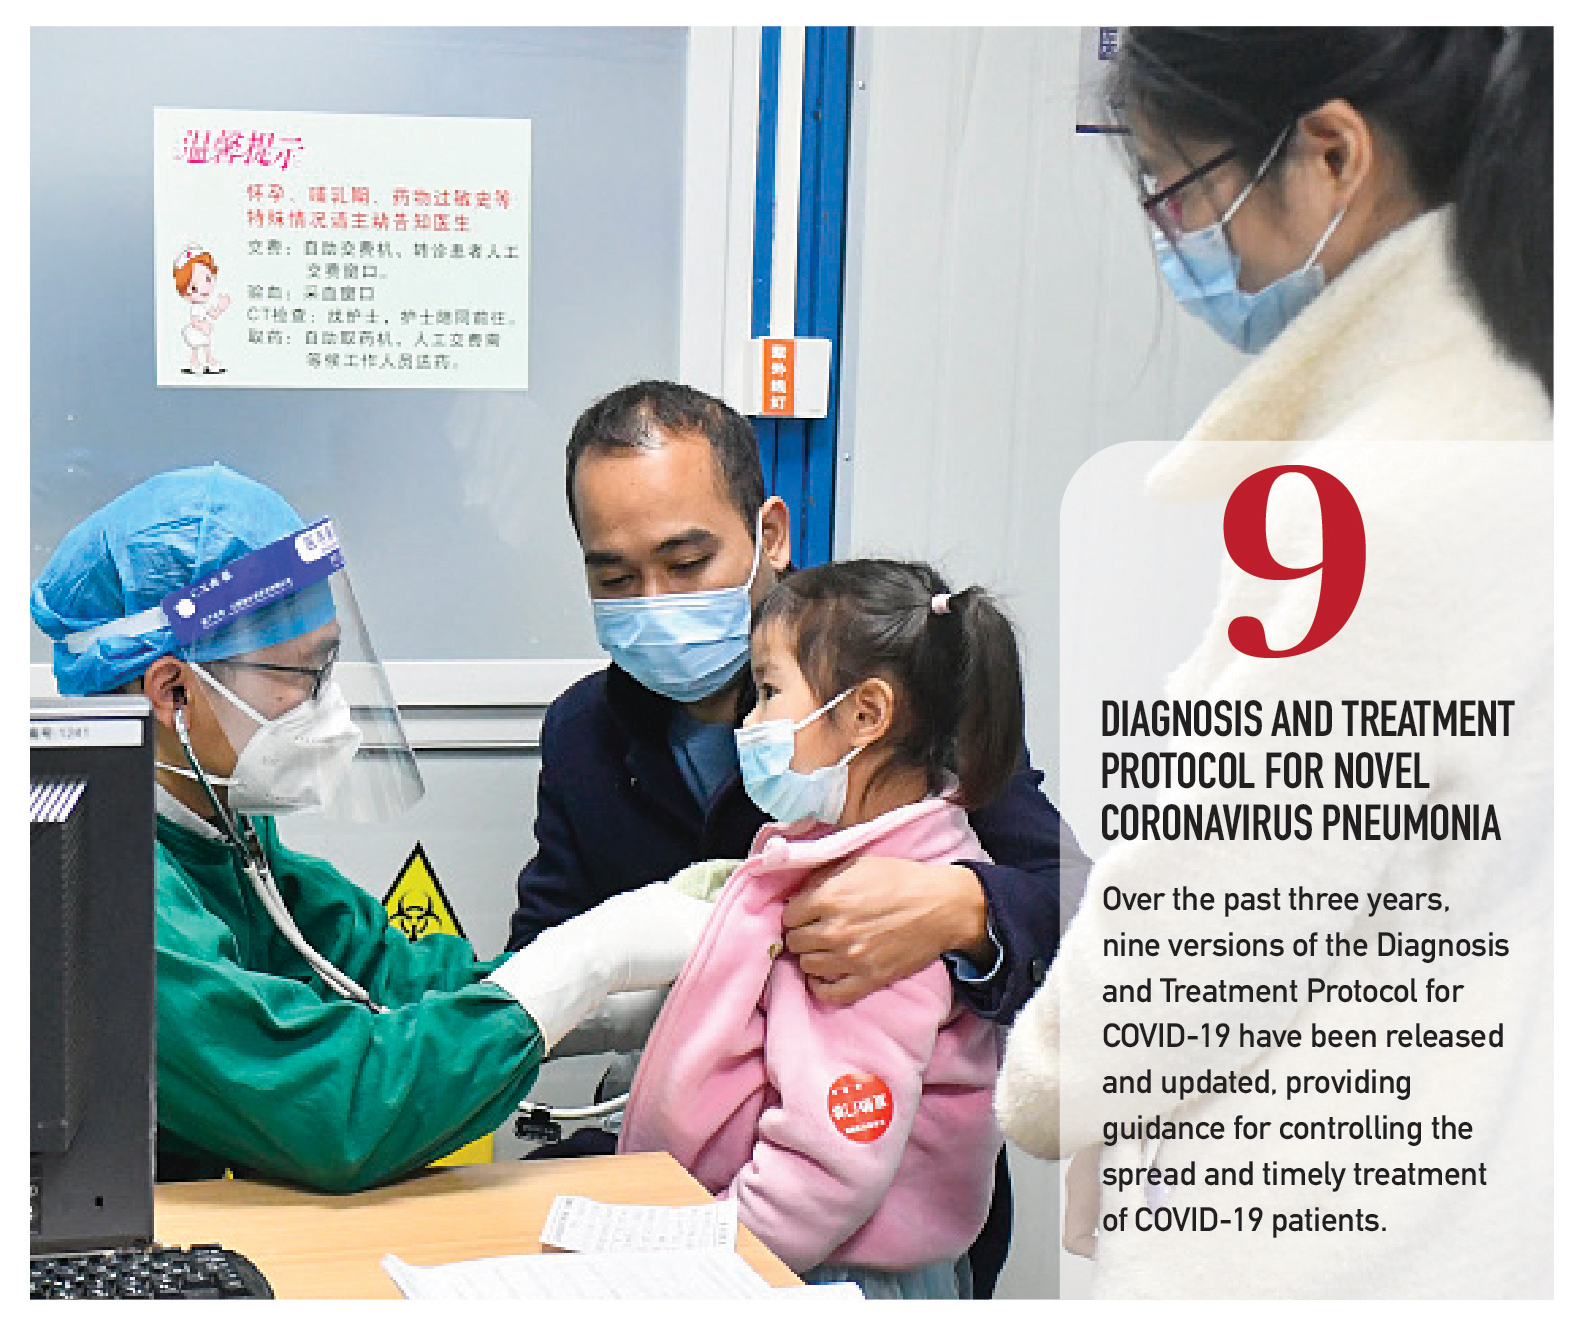 China's COVID-19 fight in numbers: Updating Chinese methods of diagnosing and treating COVID